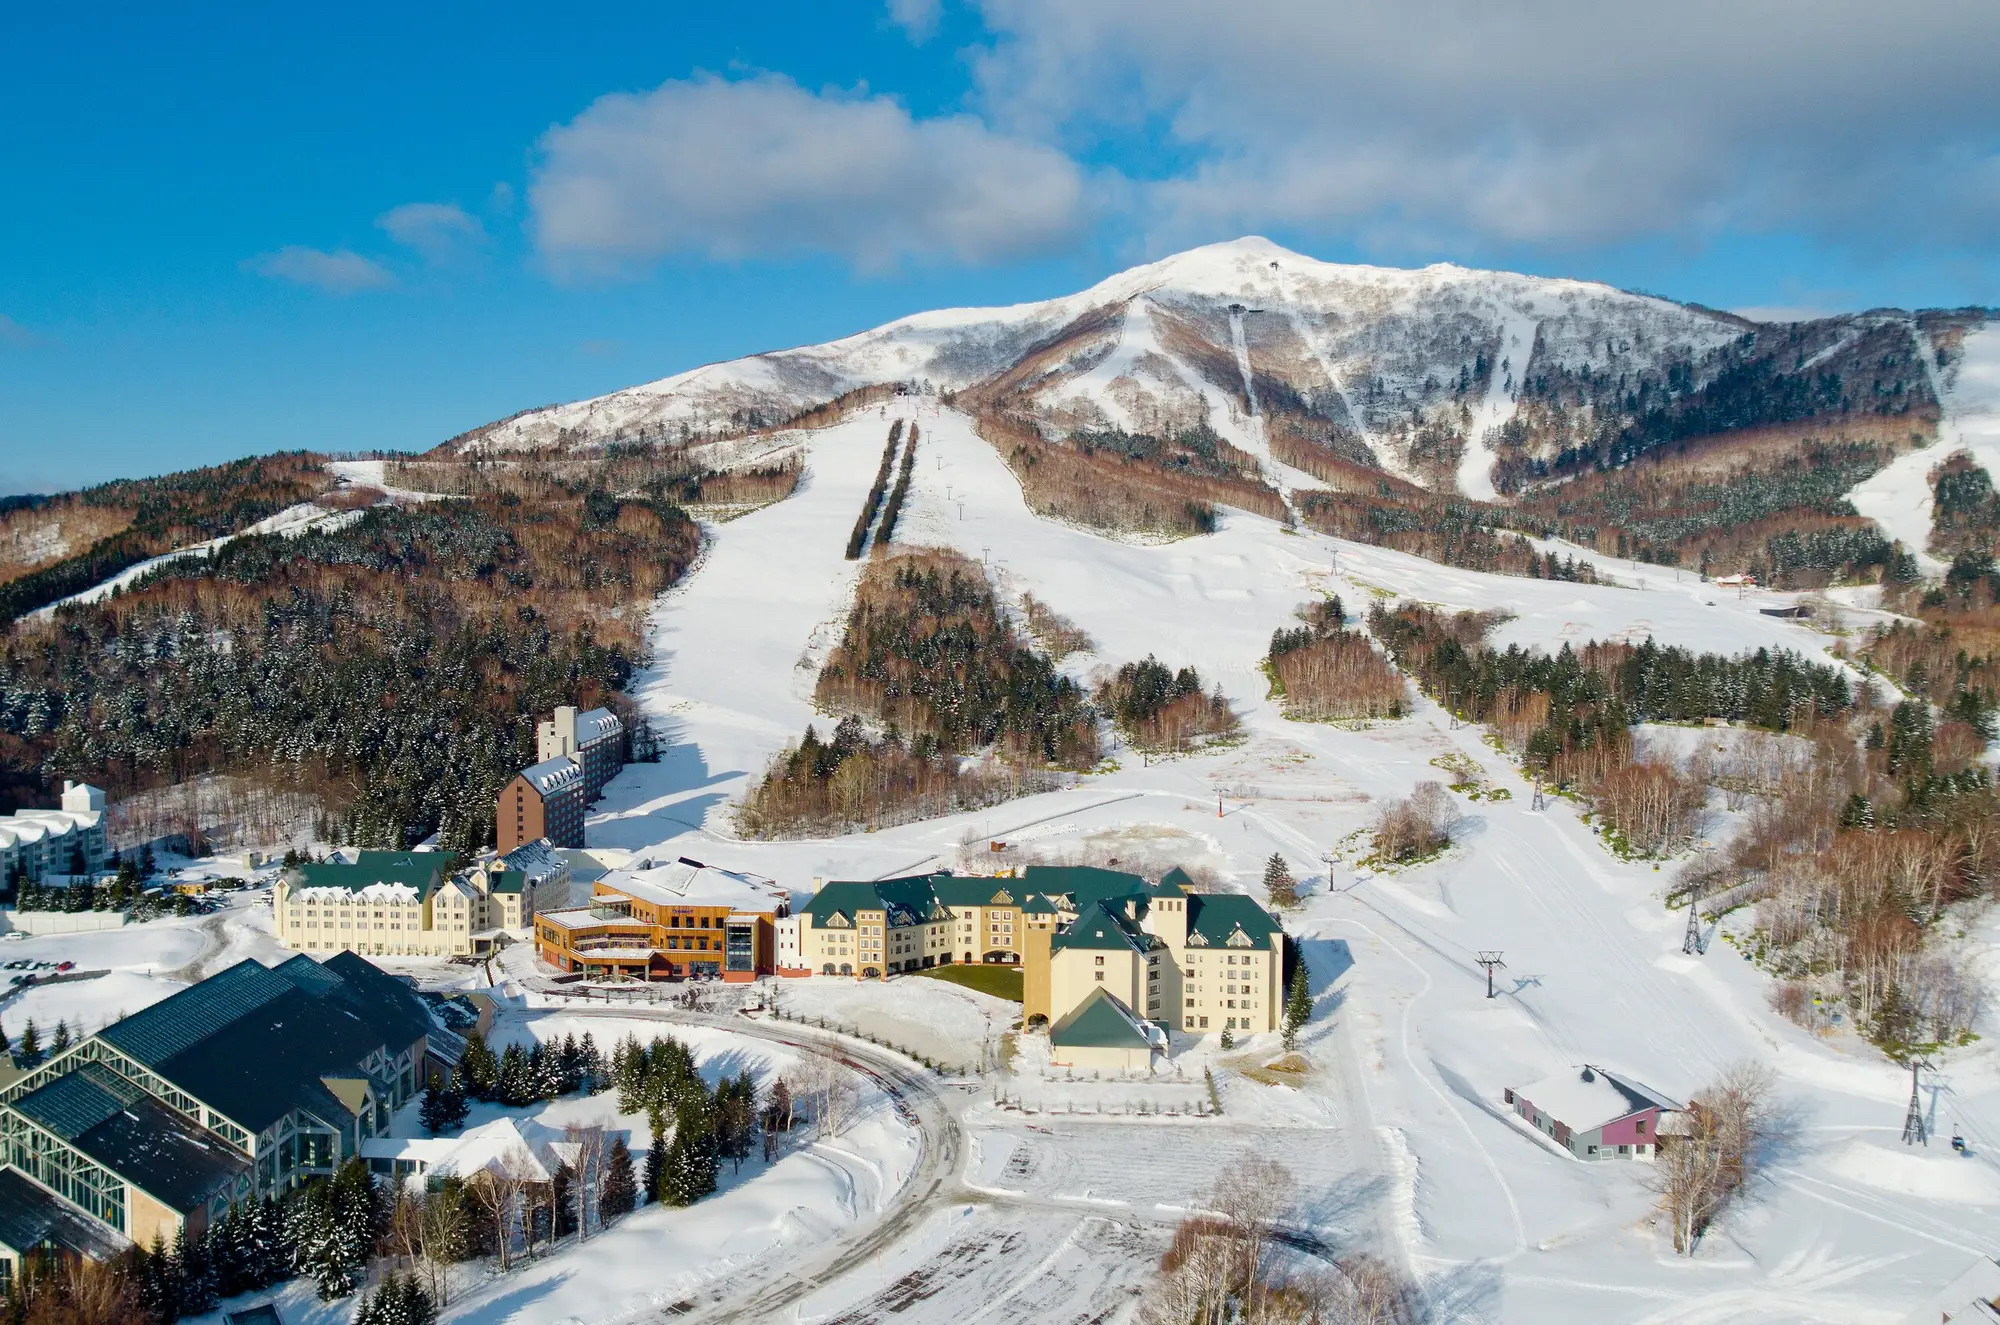 A Club Med snow holiday resort in Hokkaido, Japan. The country was the No 1 choice of Hong Kong travellers and those from elsewhere in East Asia, although not China, who have recently taken a skiing holiday or plan to take one in the next two years, according to a Club Med survey. Photo: Club Med